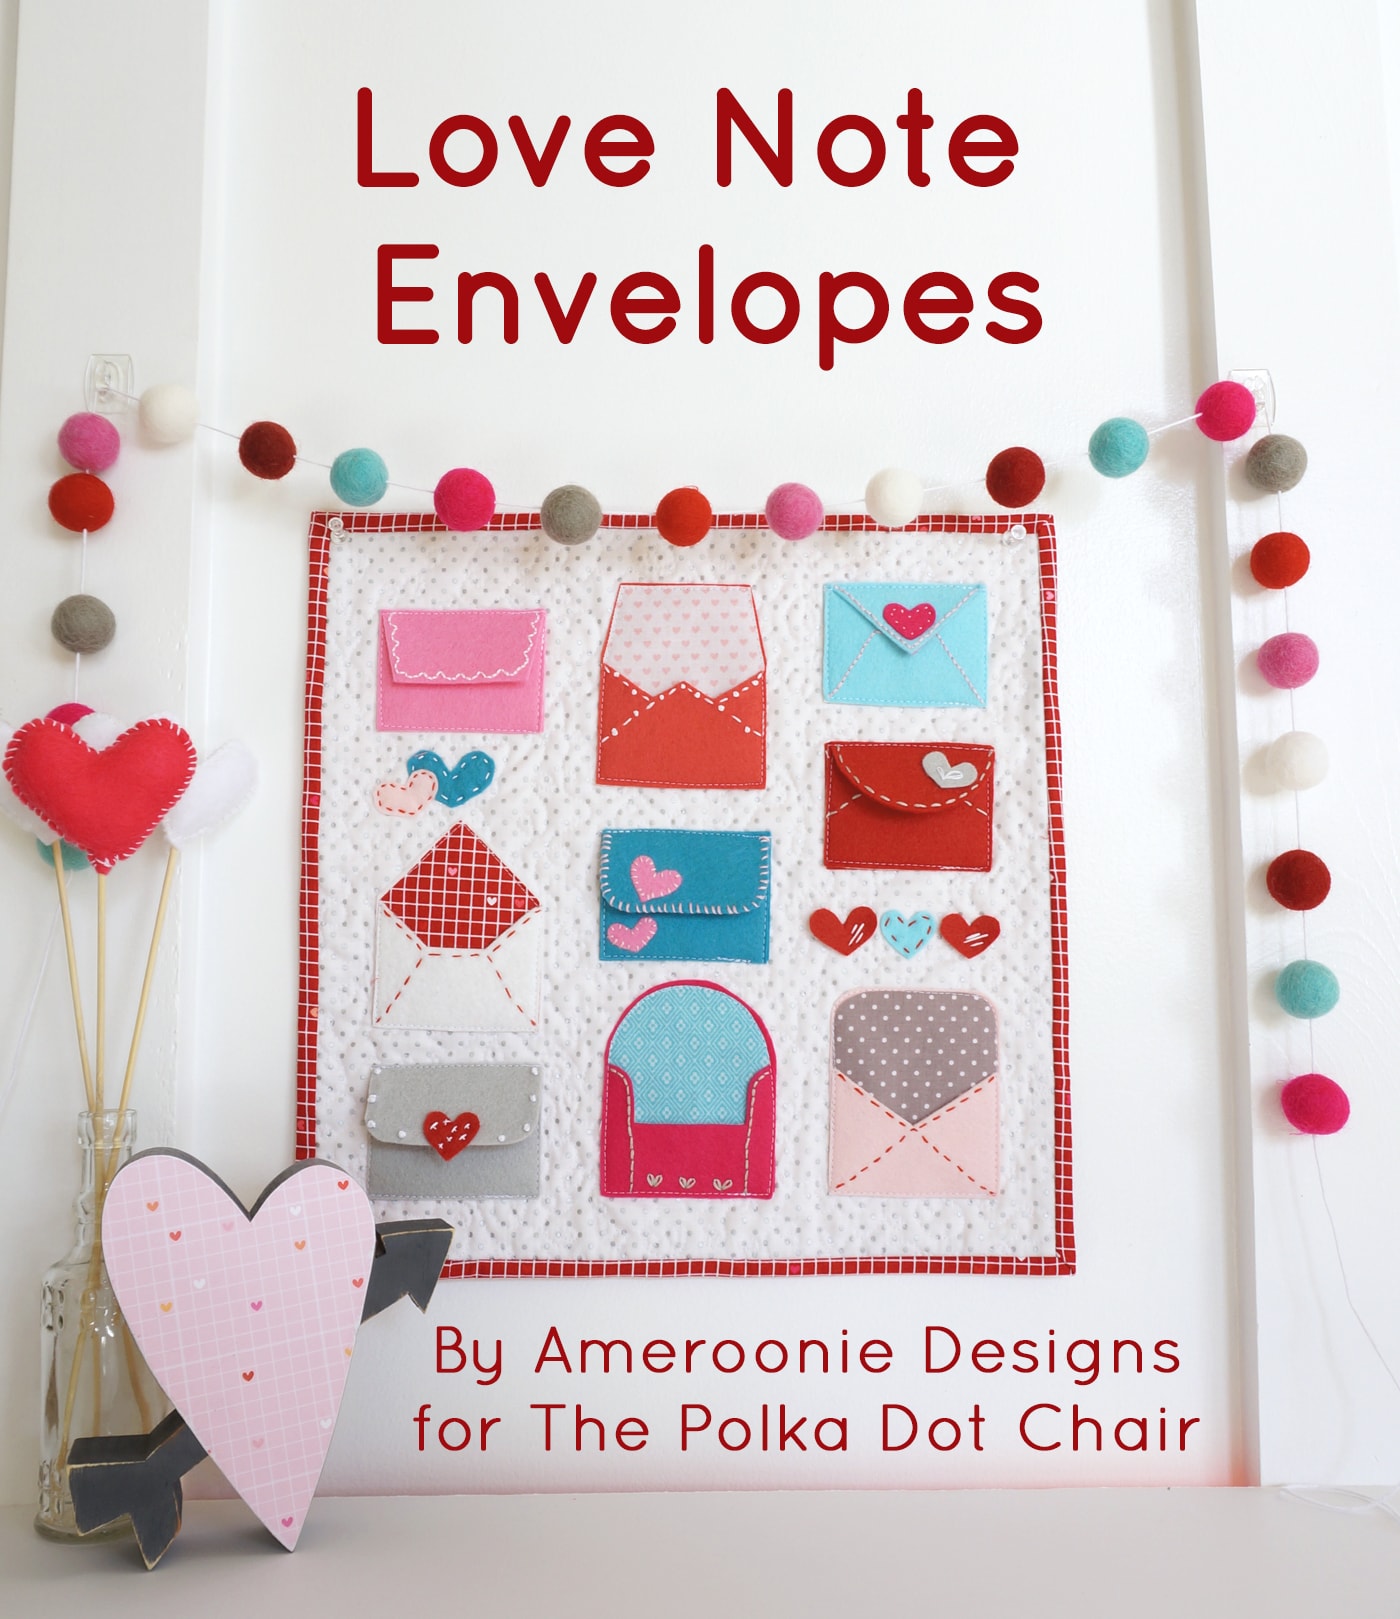 A free pattern for "Love Notes" a Valentine's Day Craft idea. A felt envelope tutorial - with hand embroidery and felt applique #ValentinesDay #ValentinesDayCraft #FeltEnvelope #FeltCrafts #FeltProject #EmbroideryHoopArt